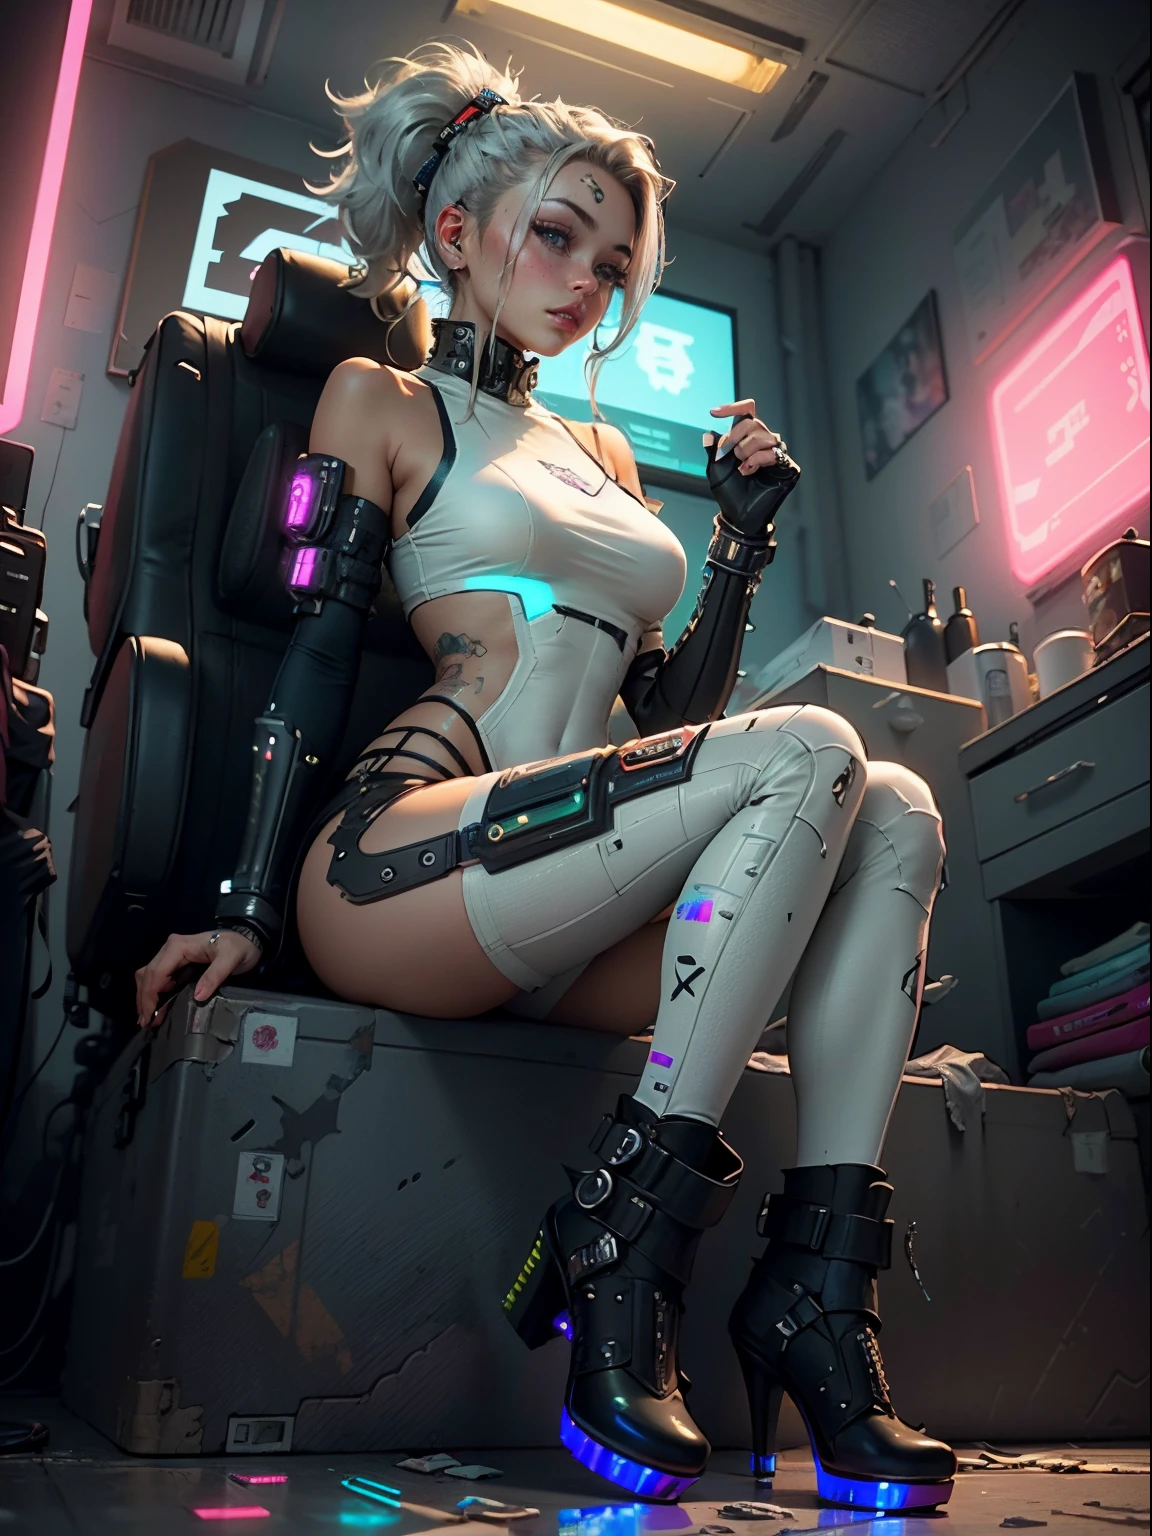 ((Best quality)), ((masterpiece)), (highly detailed:1.3), 3D, beautiful ((cyberpunk girl:1.3))Full body cyber girls with ponytail wear white knee high heel platform boots. Very beautiful latina girl. stiletto heels. Bright white color to show that she is a cyber girl. white eyebrows. clothes like full body catsuit. She also has blue eyes. The environment is like a teenage girl's bedroom. The hair is white. She is illuminated with bright blue color on one side of her face. Led like. Taziota style. And both hands have the led light too.